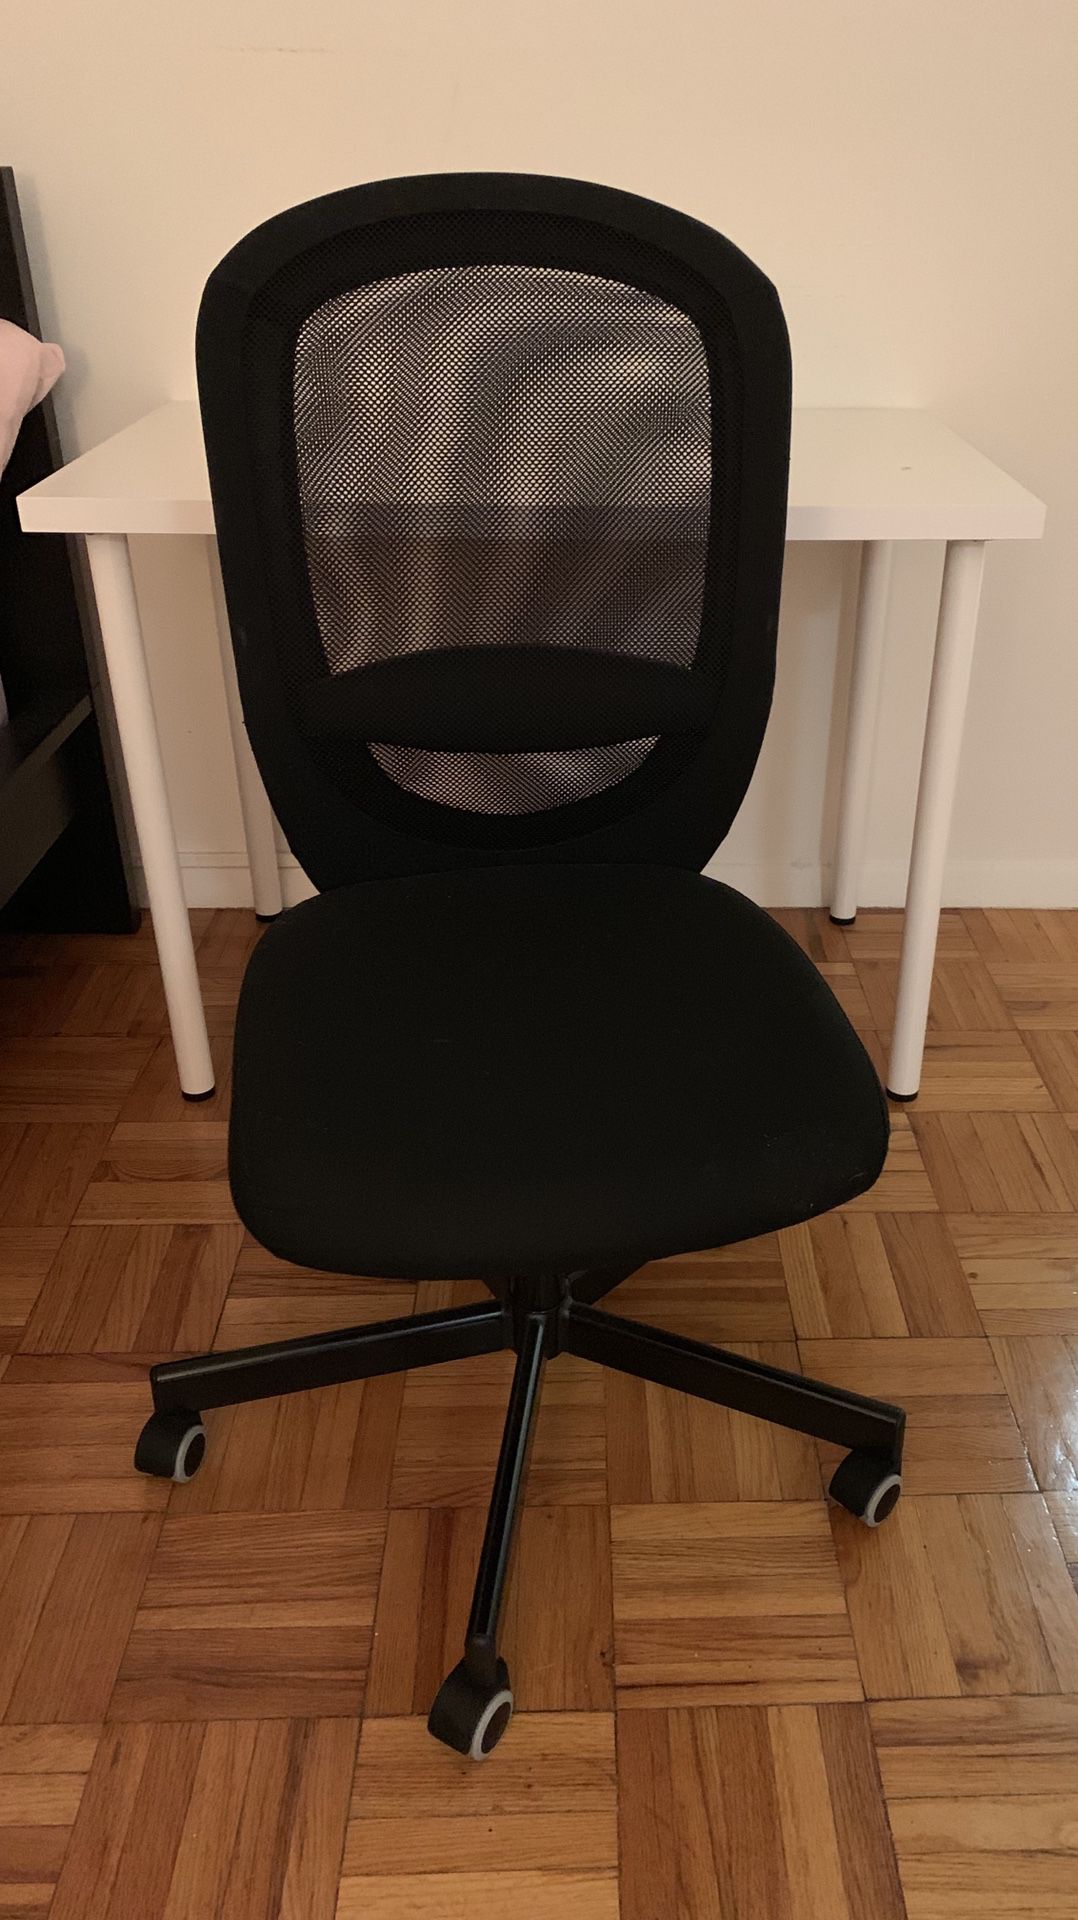 Table, computer chair, and mirror